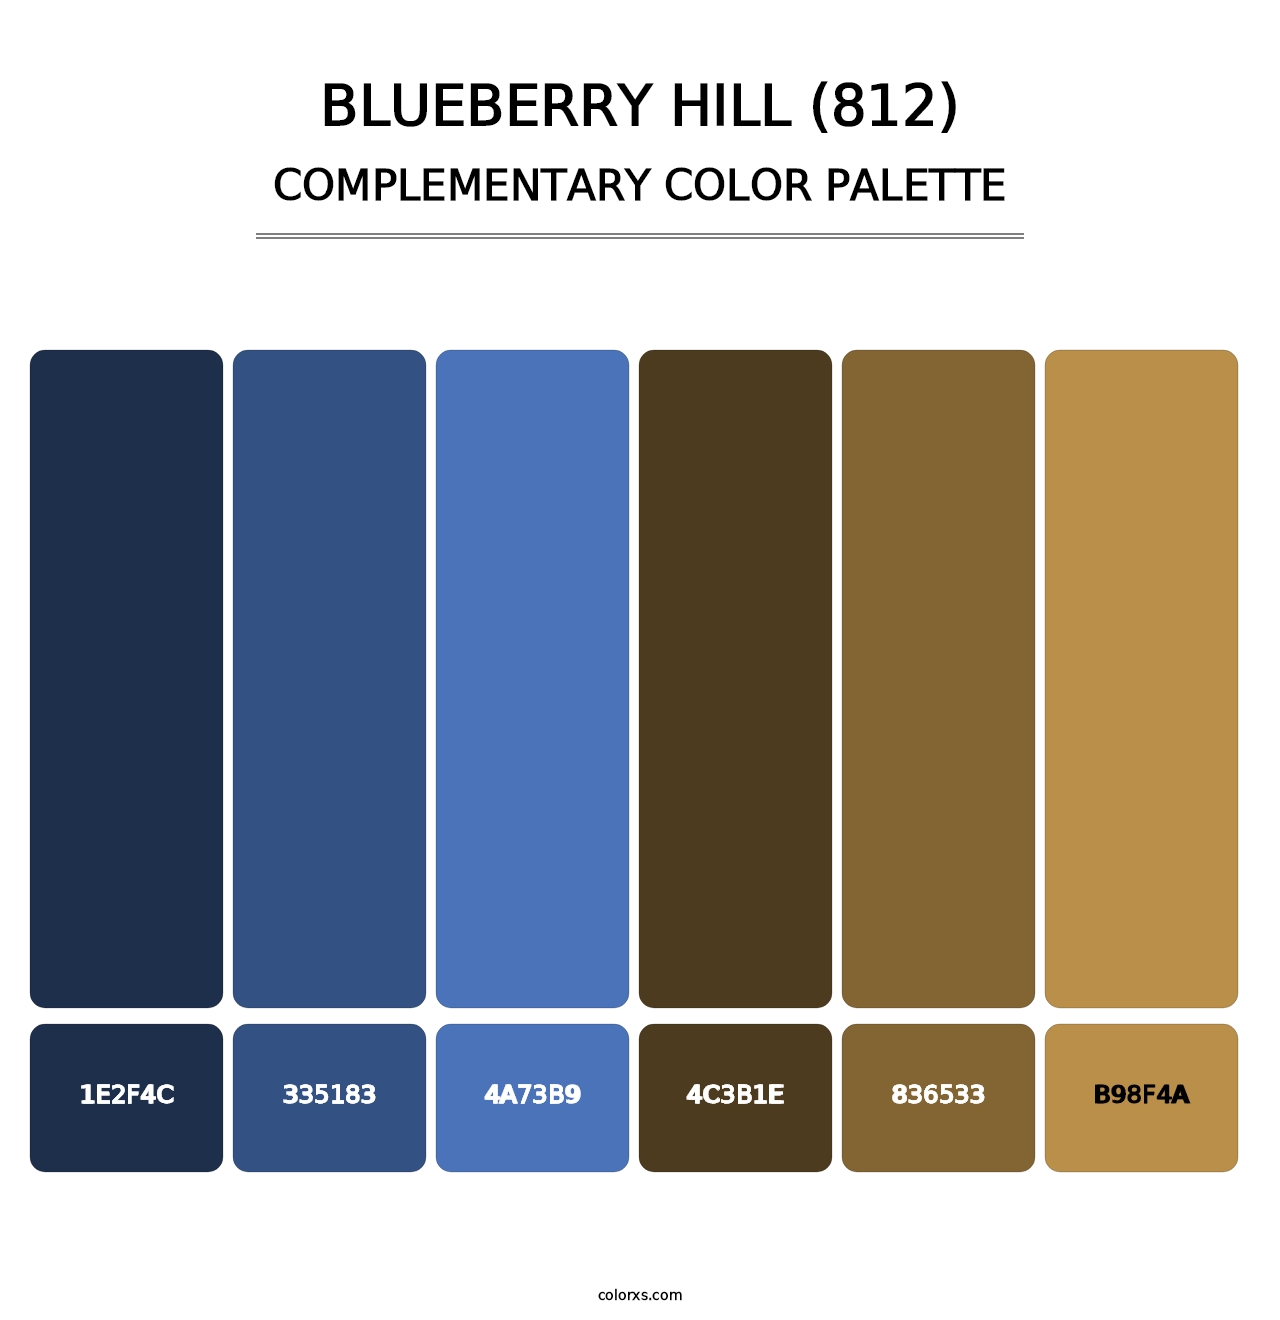 Blueberry Hill (812) - Complementary Color Palette